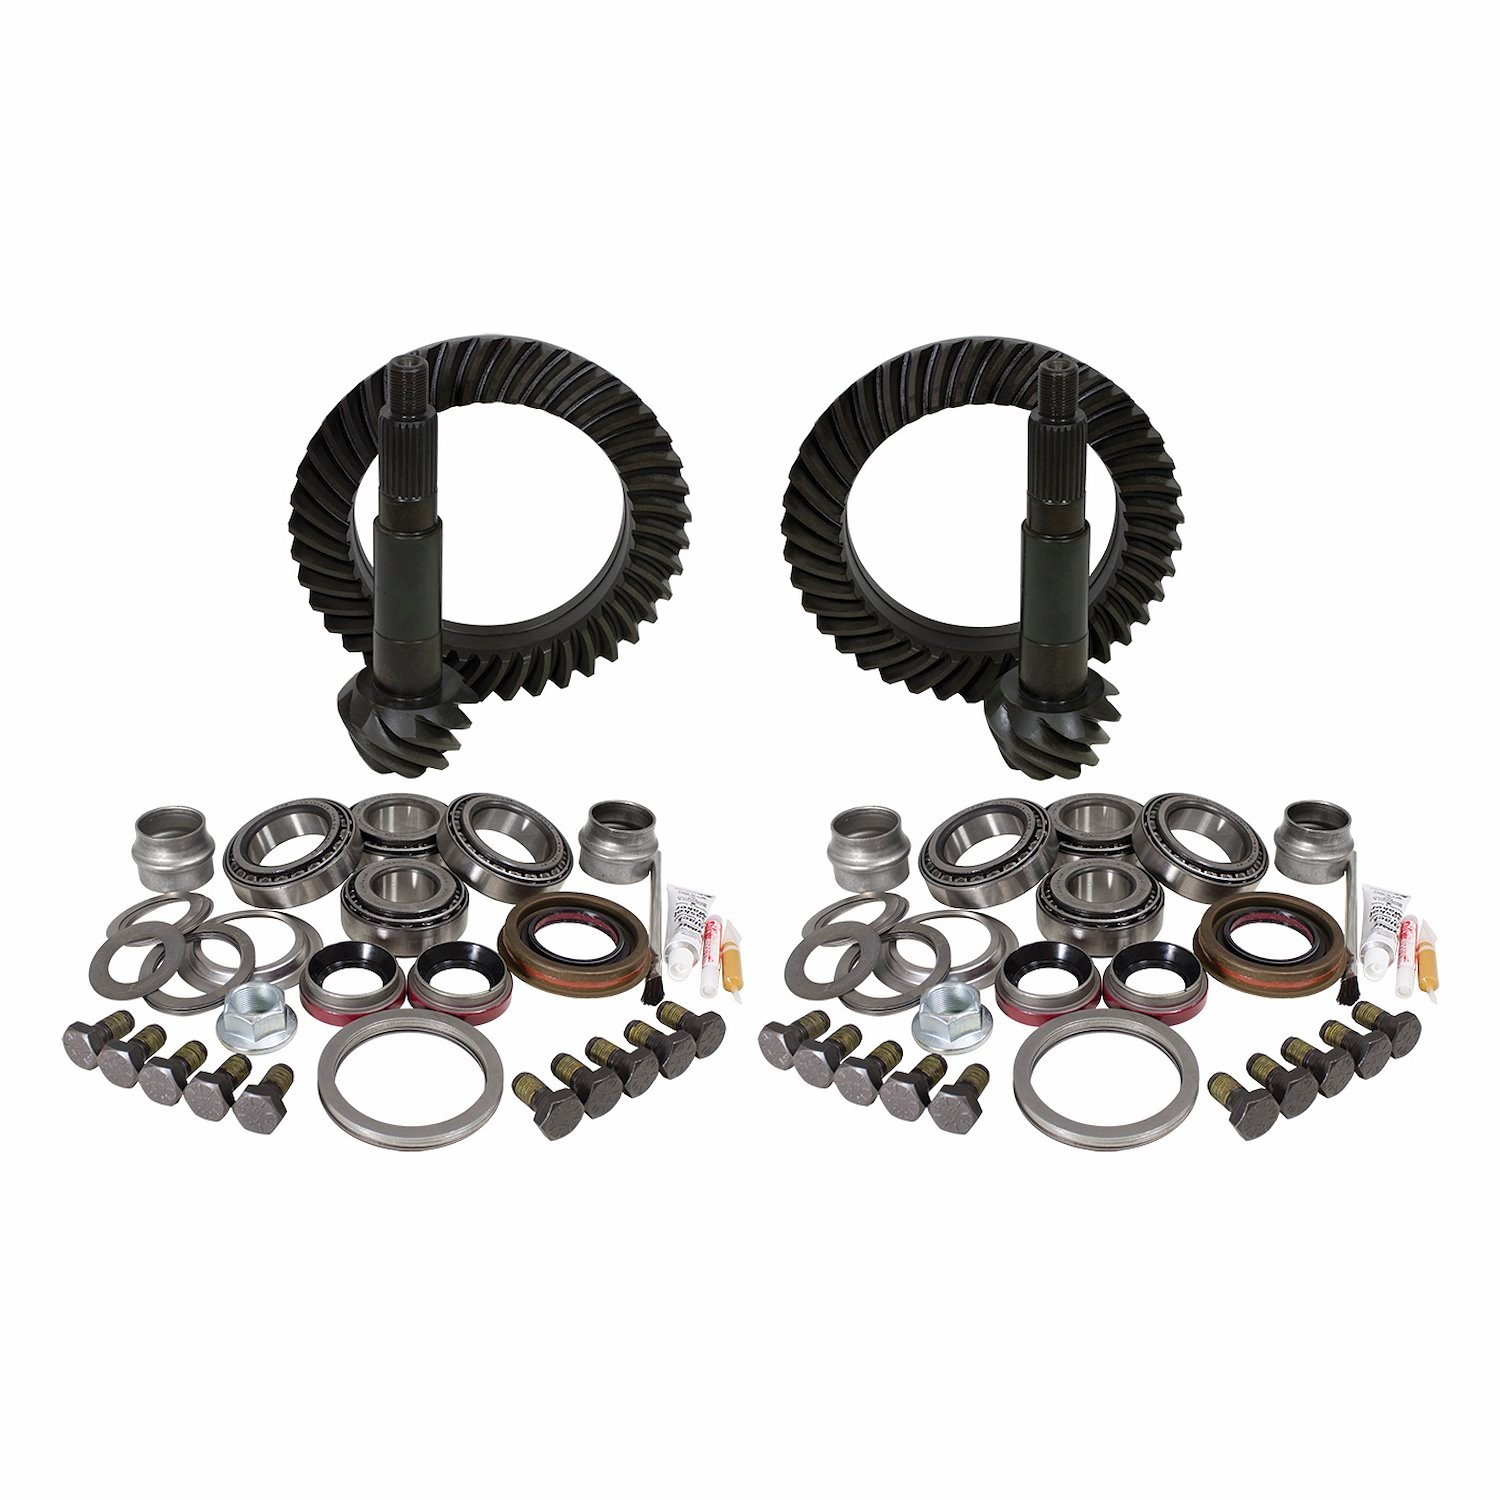 USA Standard ZGK011 Gear & Install Kit Package, For Jeep Tj Rubicon, 5.13 Ratio